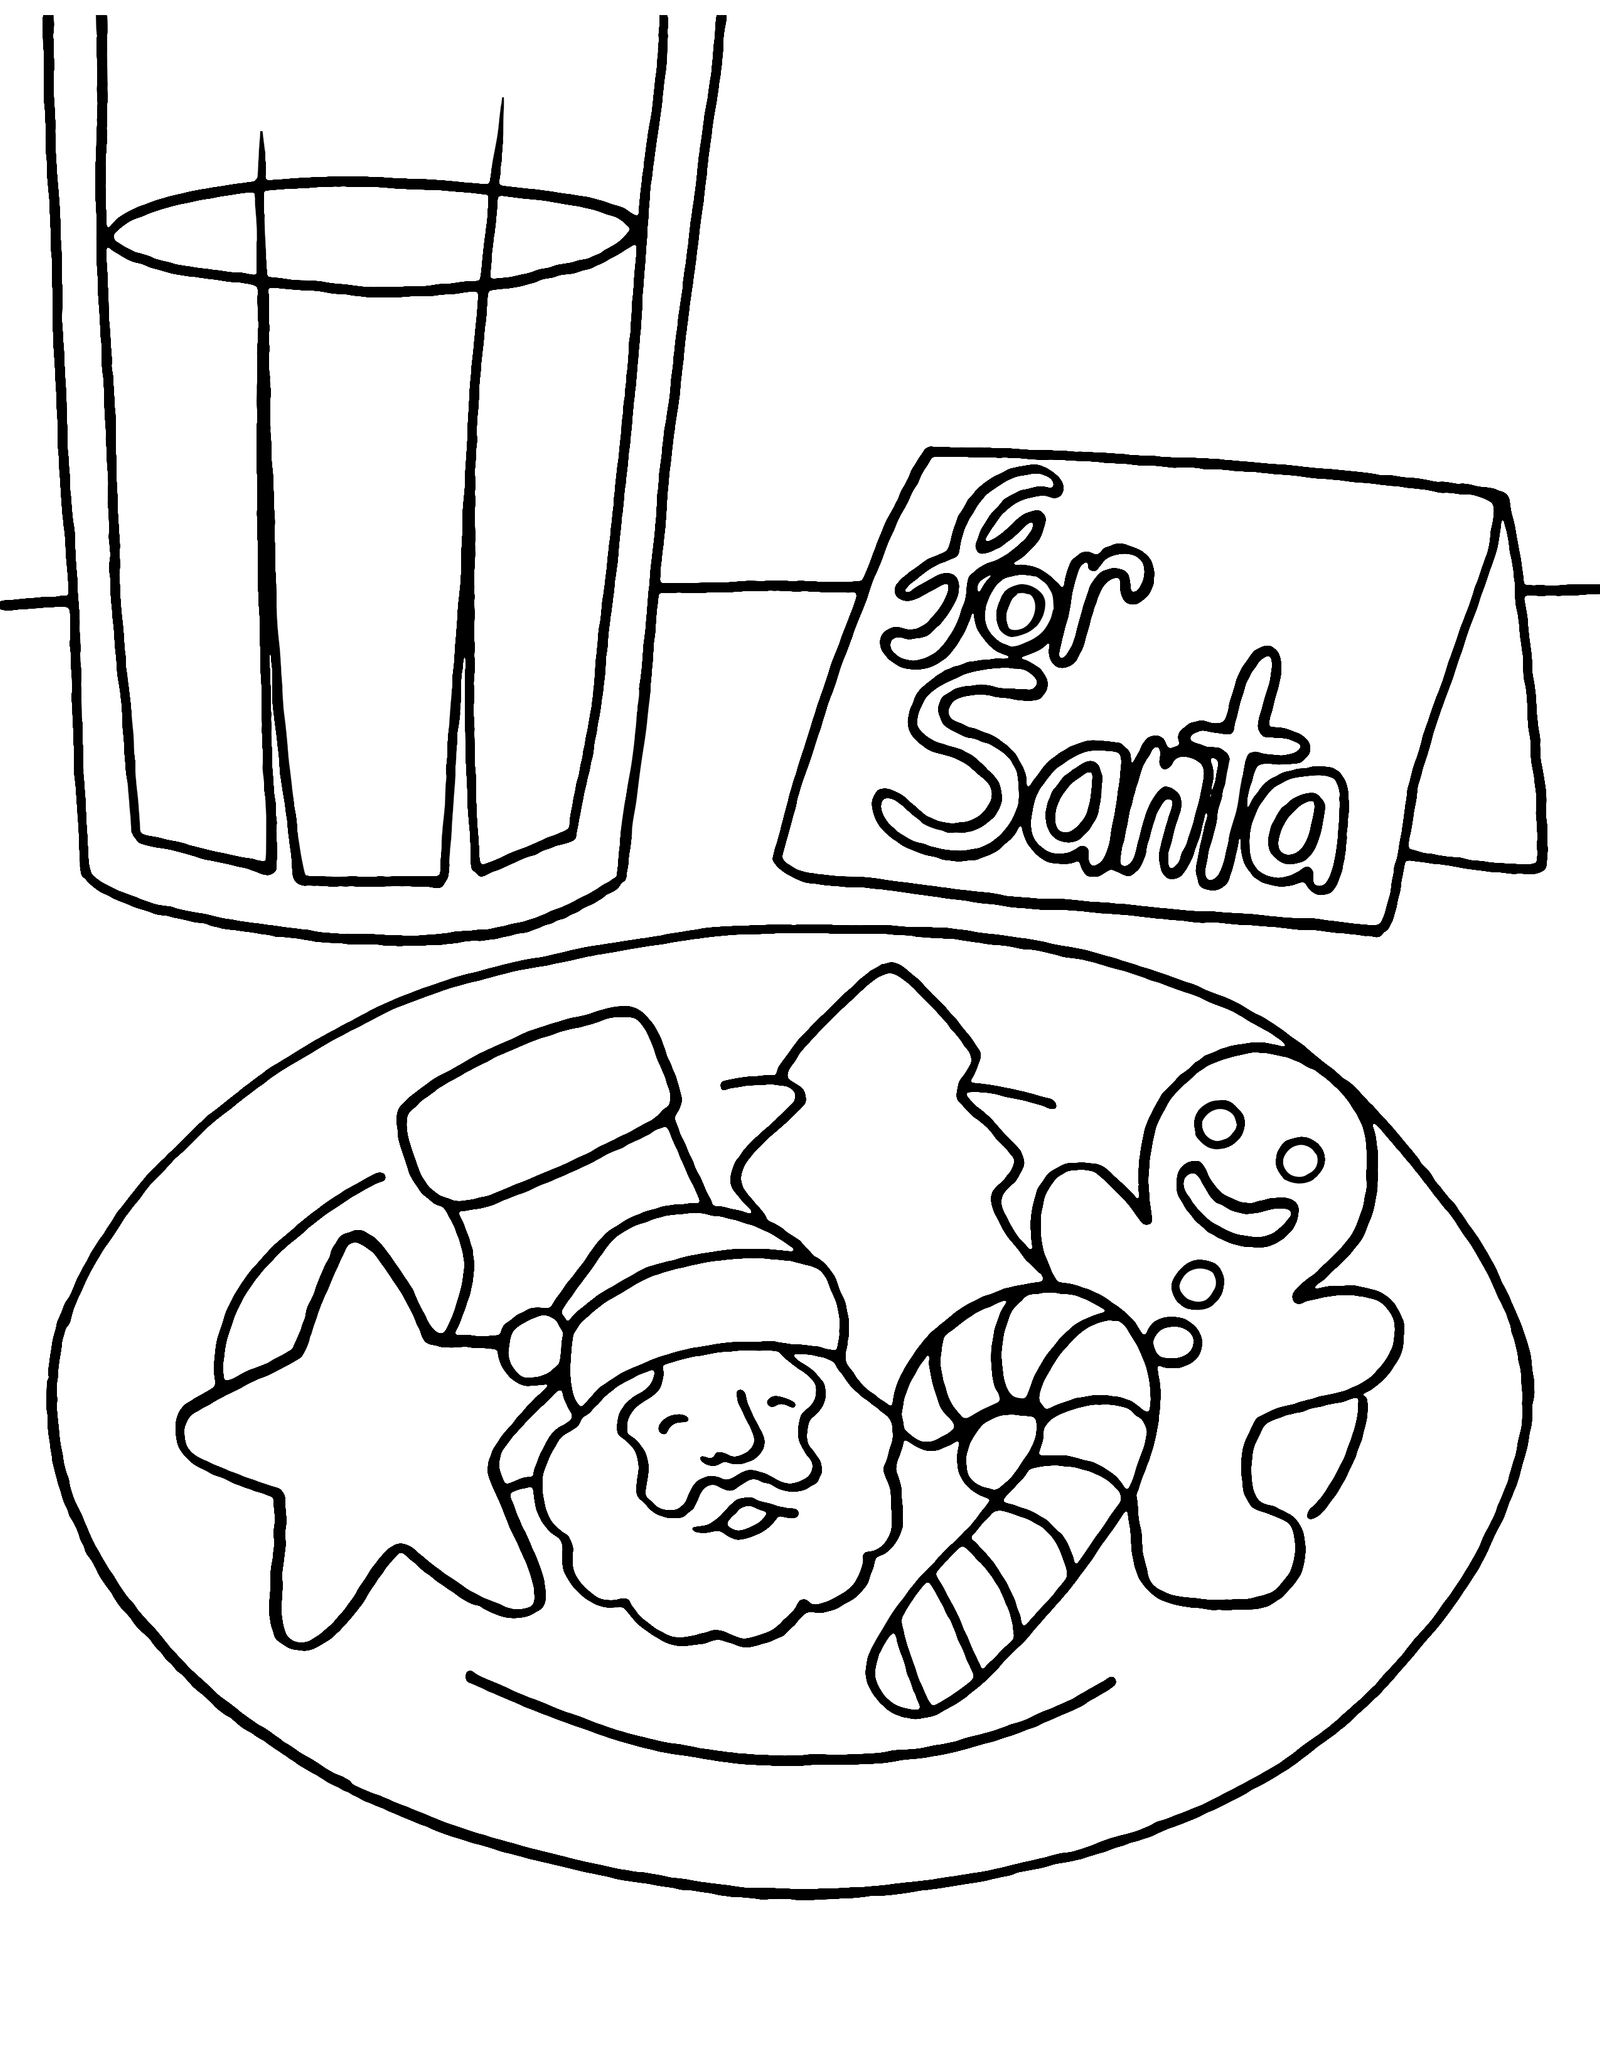 Cookies for santa coloring page by cetivarose on